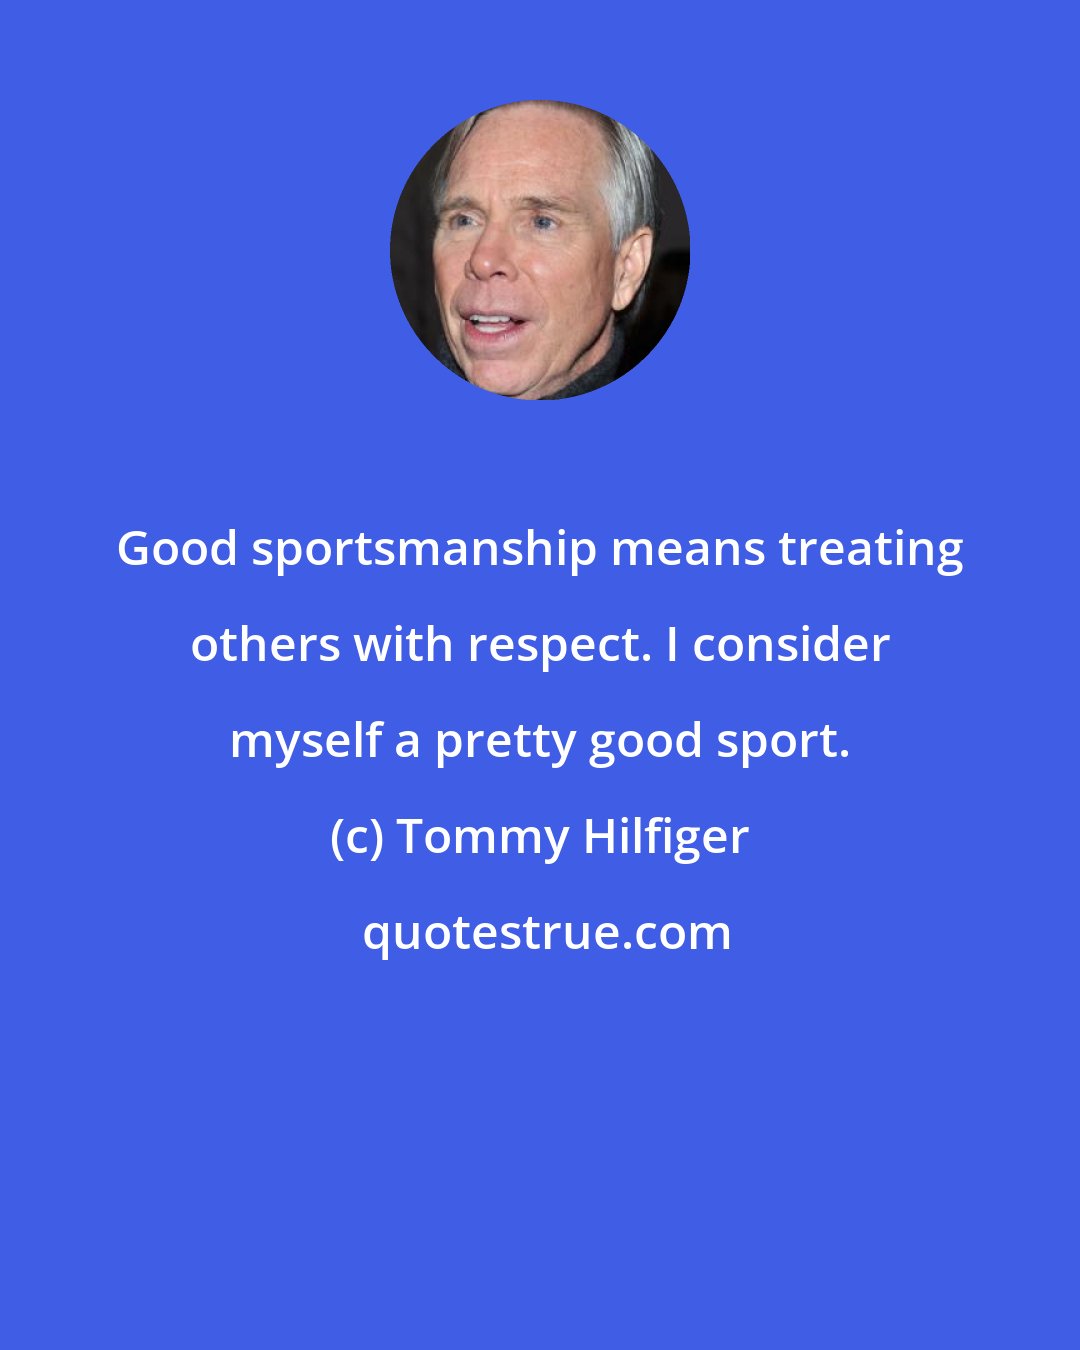 Tommy Hilfiger: Good sportsmanship means treating others with respect. I consider myself a pretty good sport.